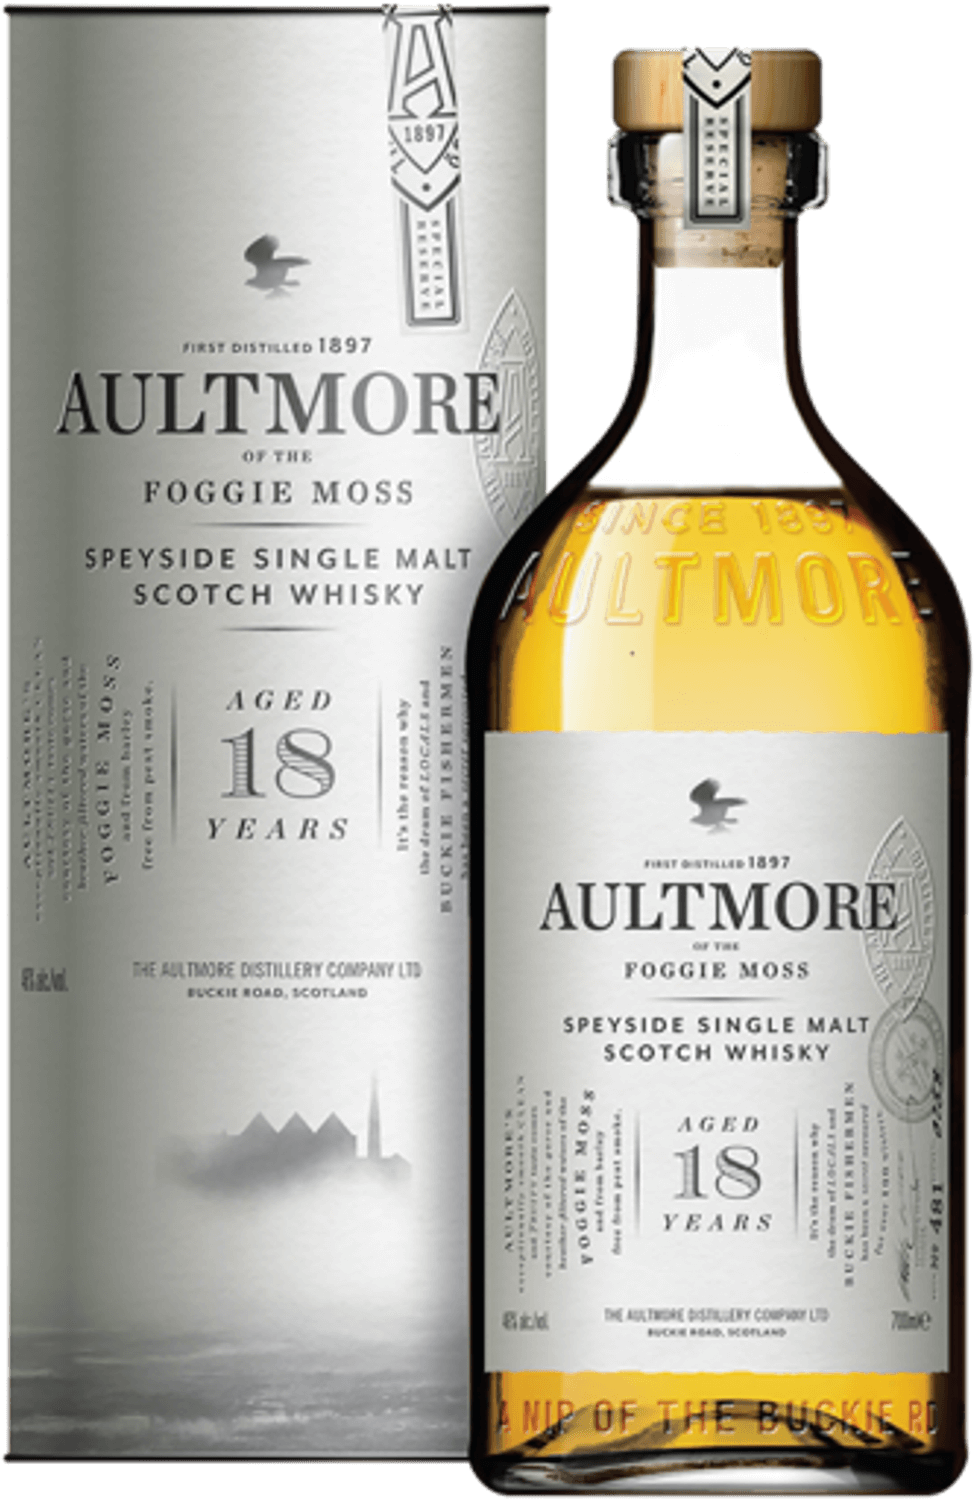 Aultmore 18 Years Old Speyside Single Malt Scotch Whisky (gift box) tullamore dew 14 years old single malt scotch whisky gift box